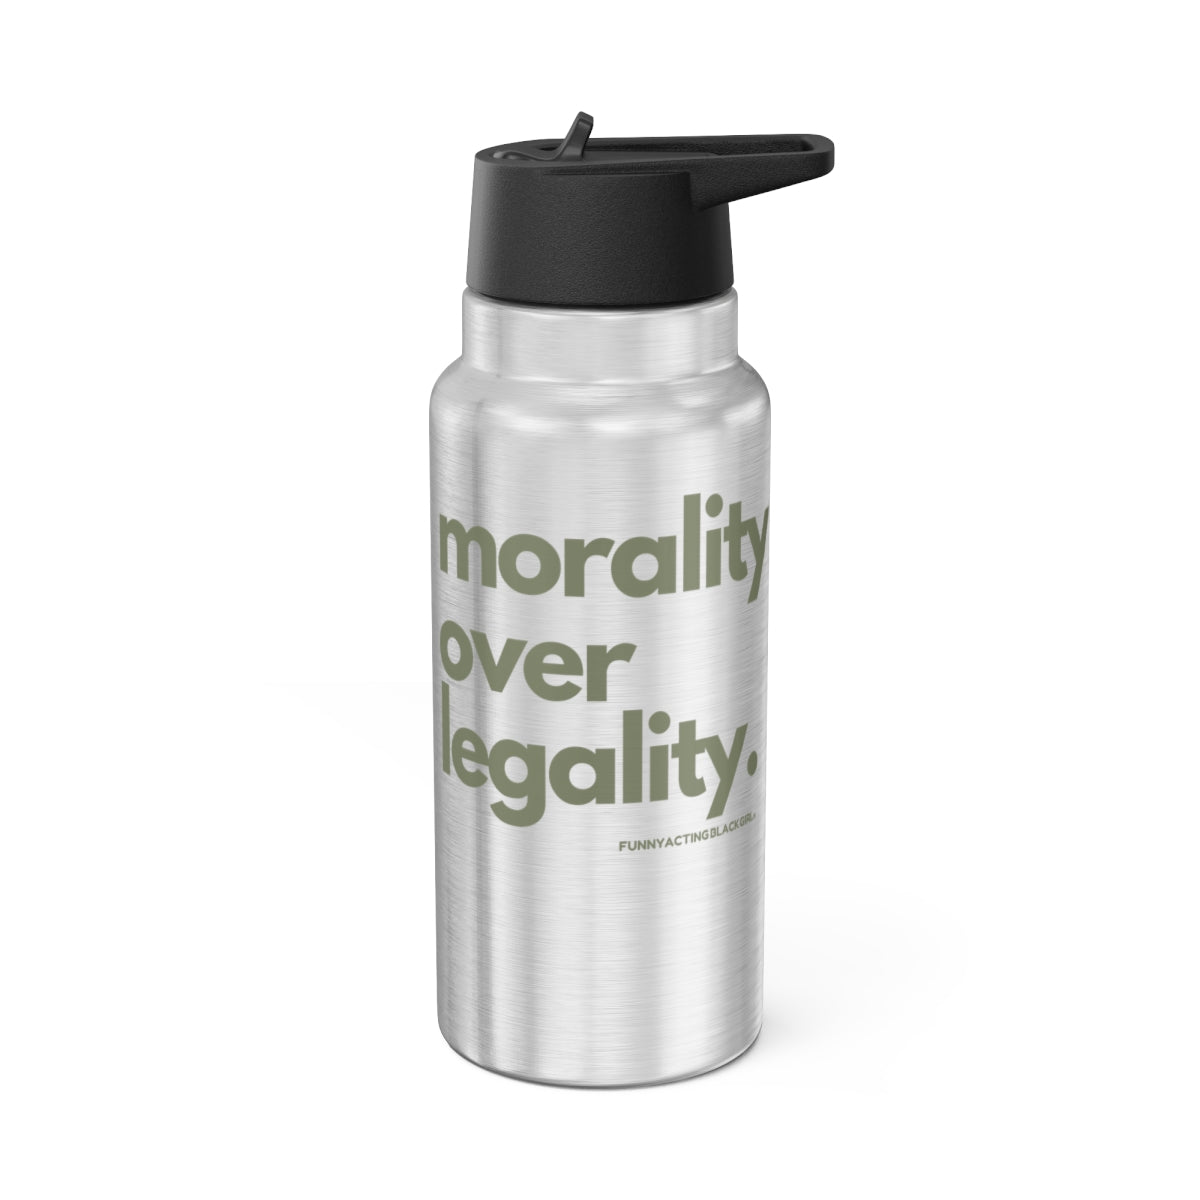 Morality Over Legality: Stainless Steel Water Bottle (32 oz)